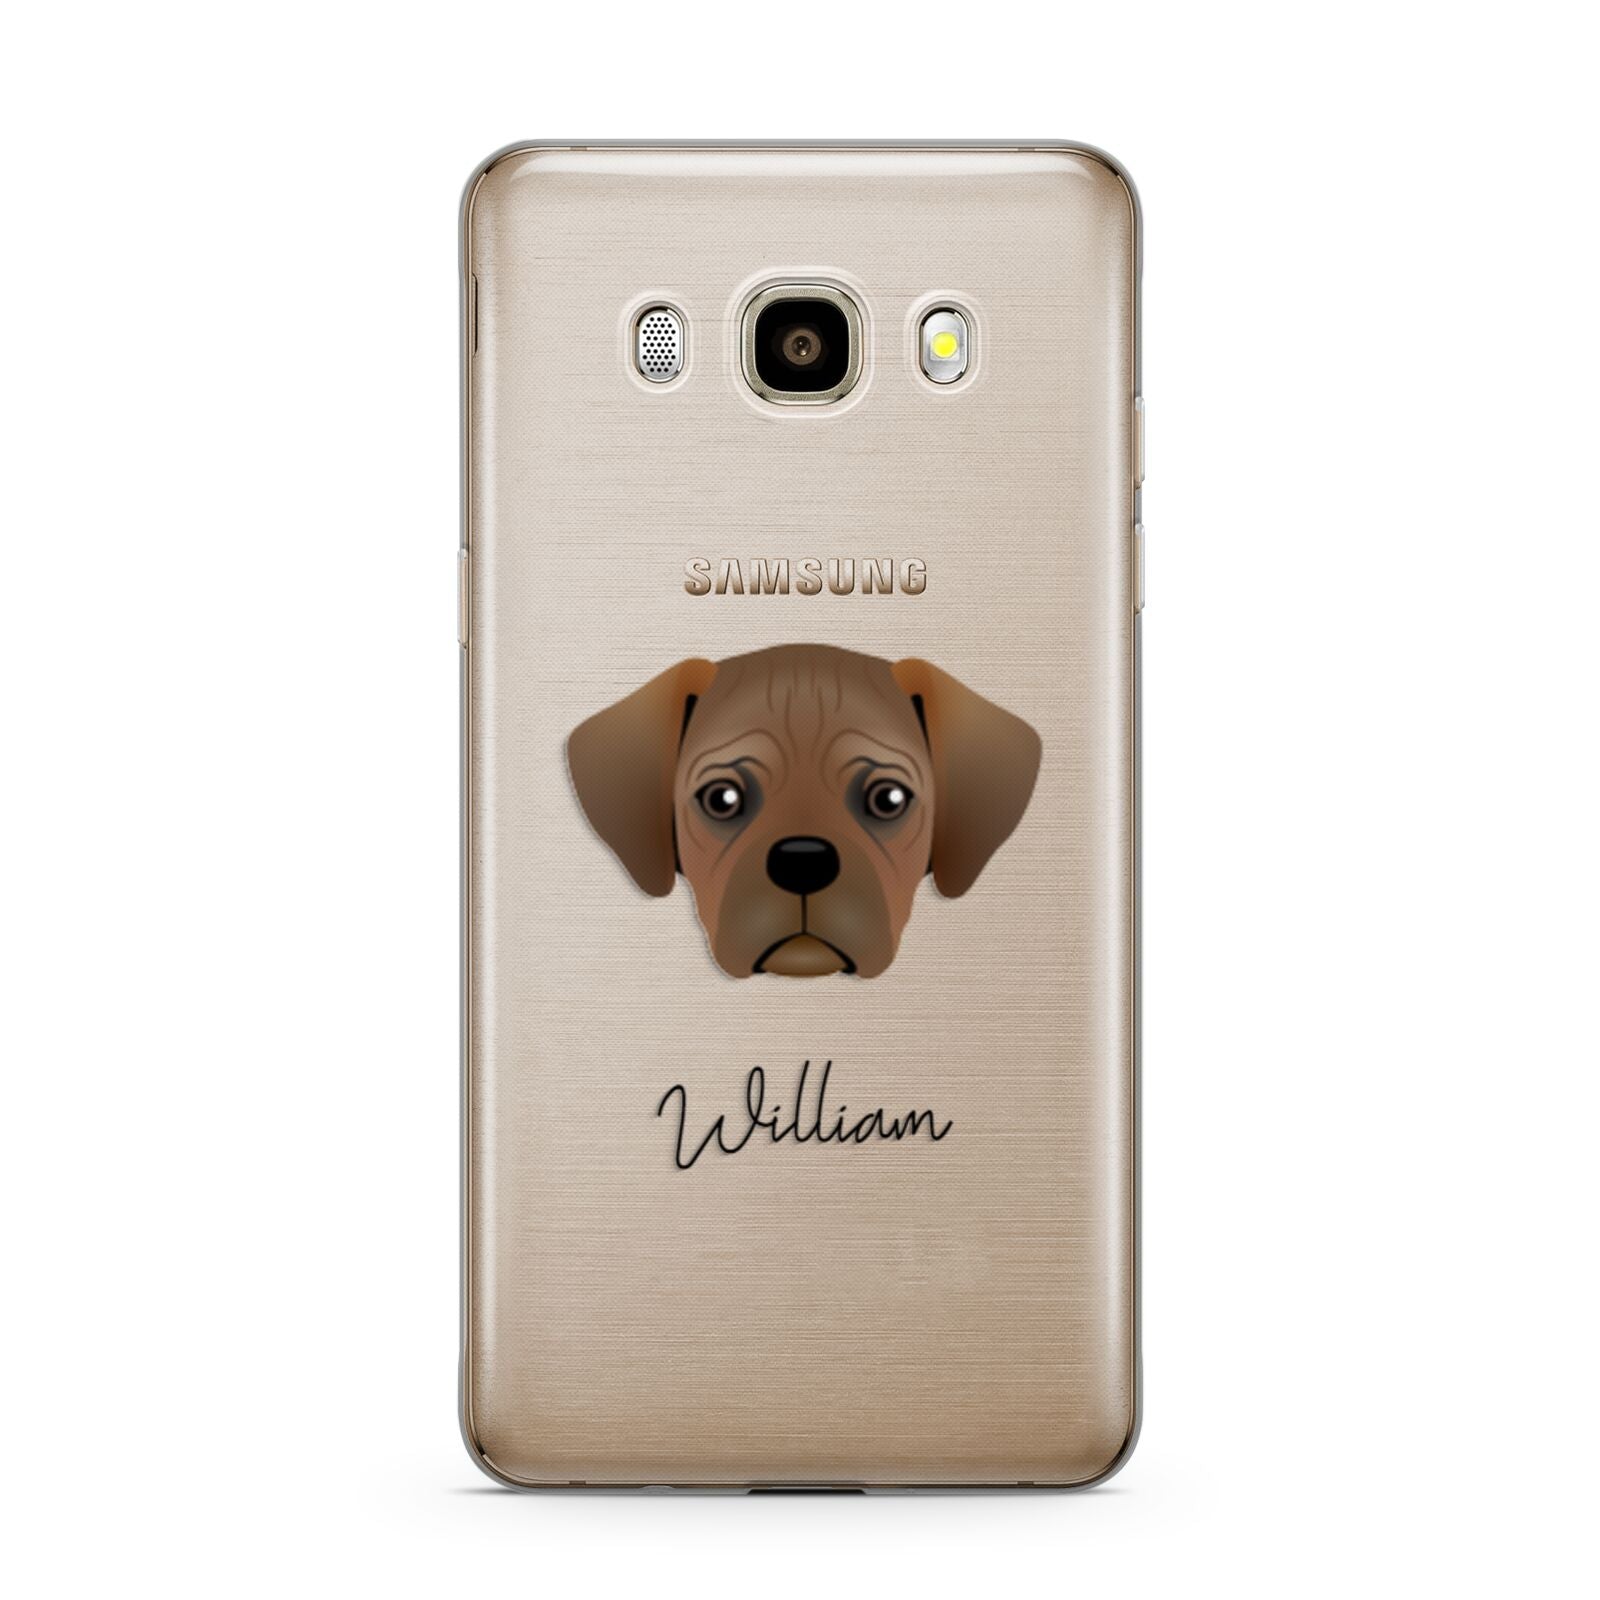 Pugalier Personalised Samsung Galaxy J7 2016 Case on gold phone